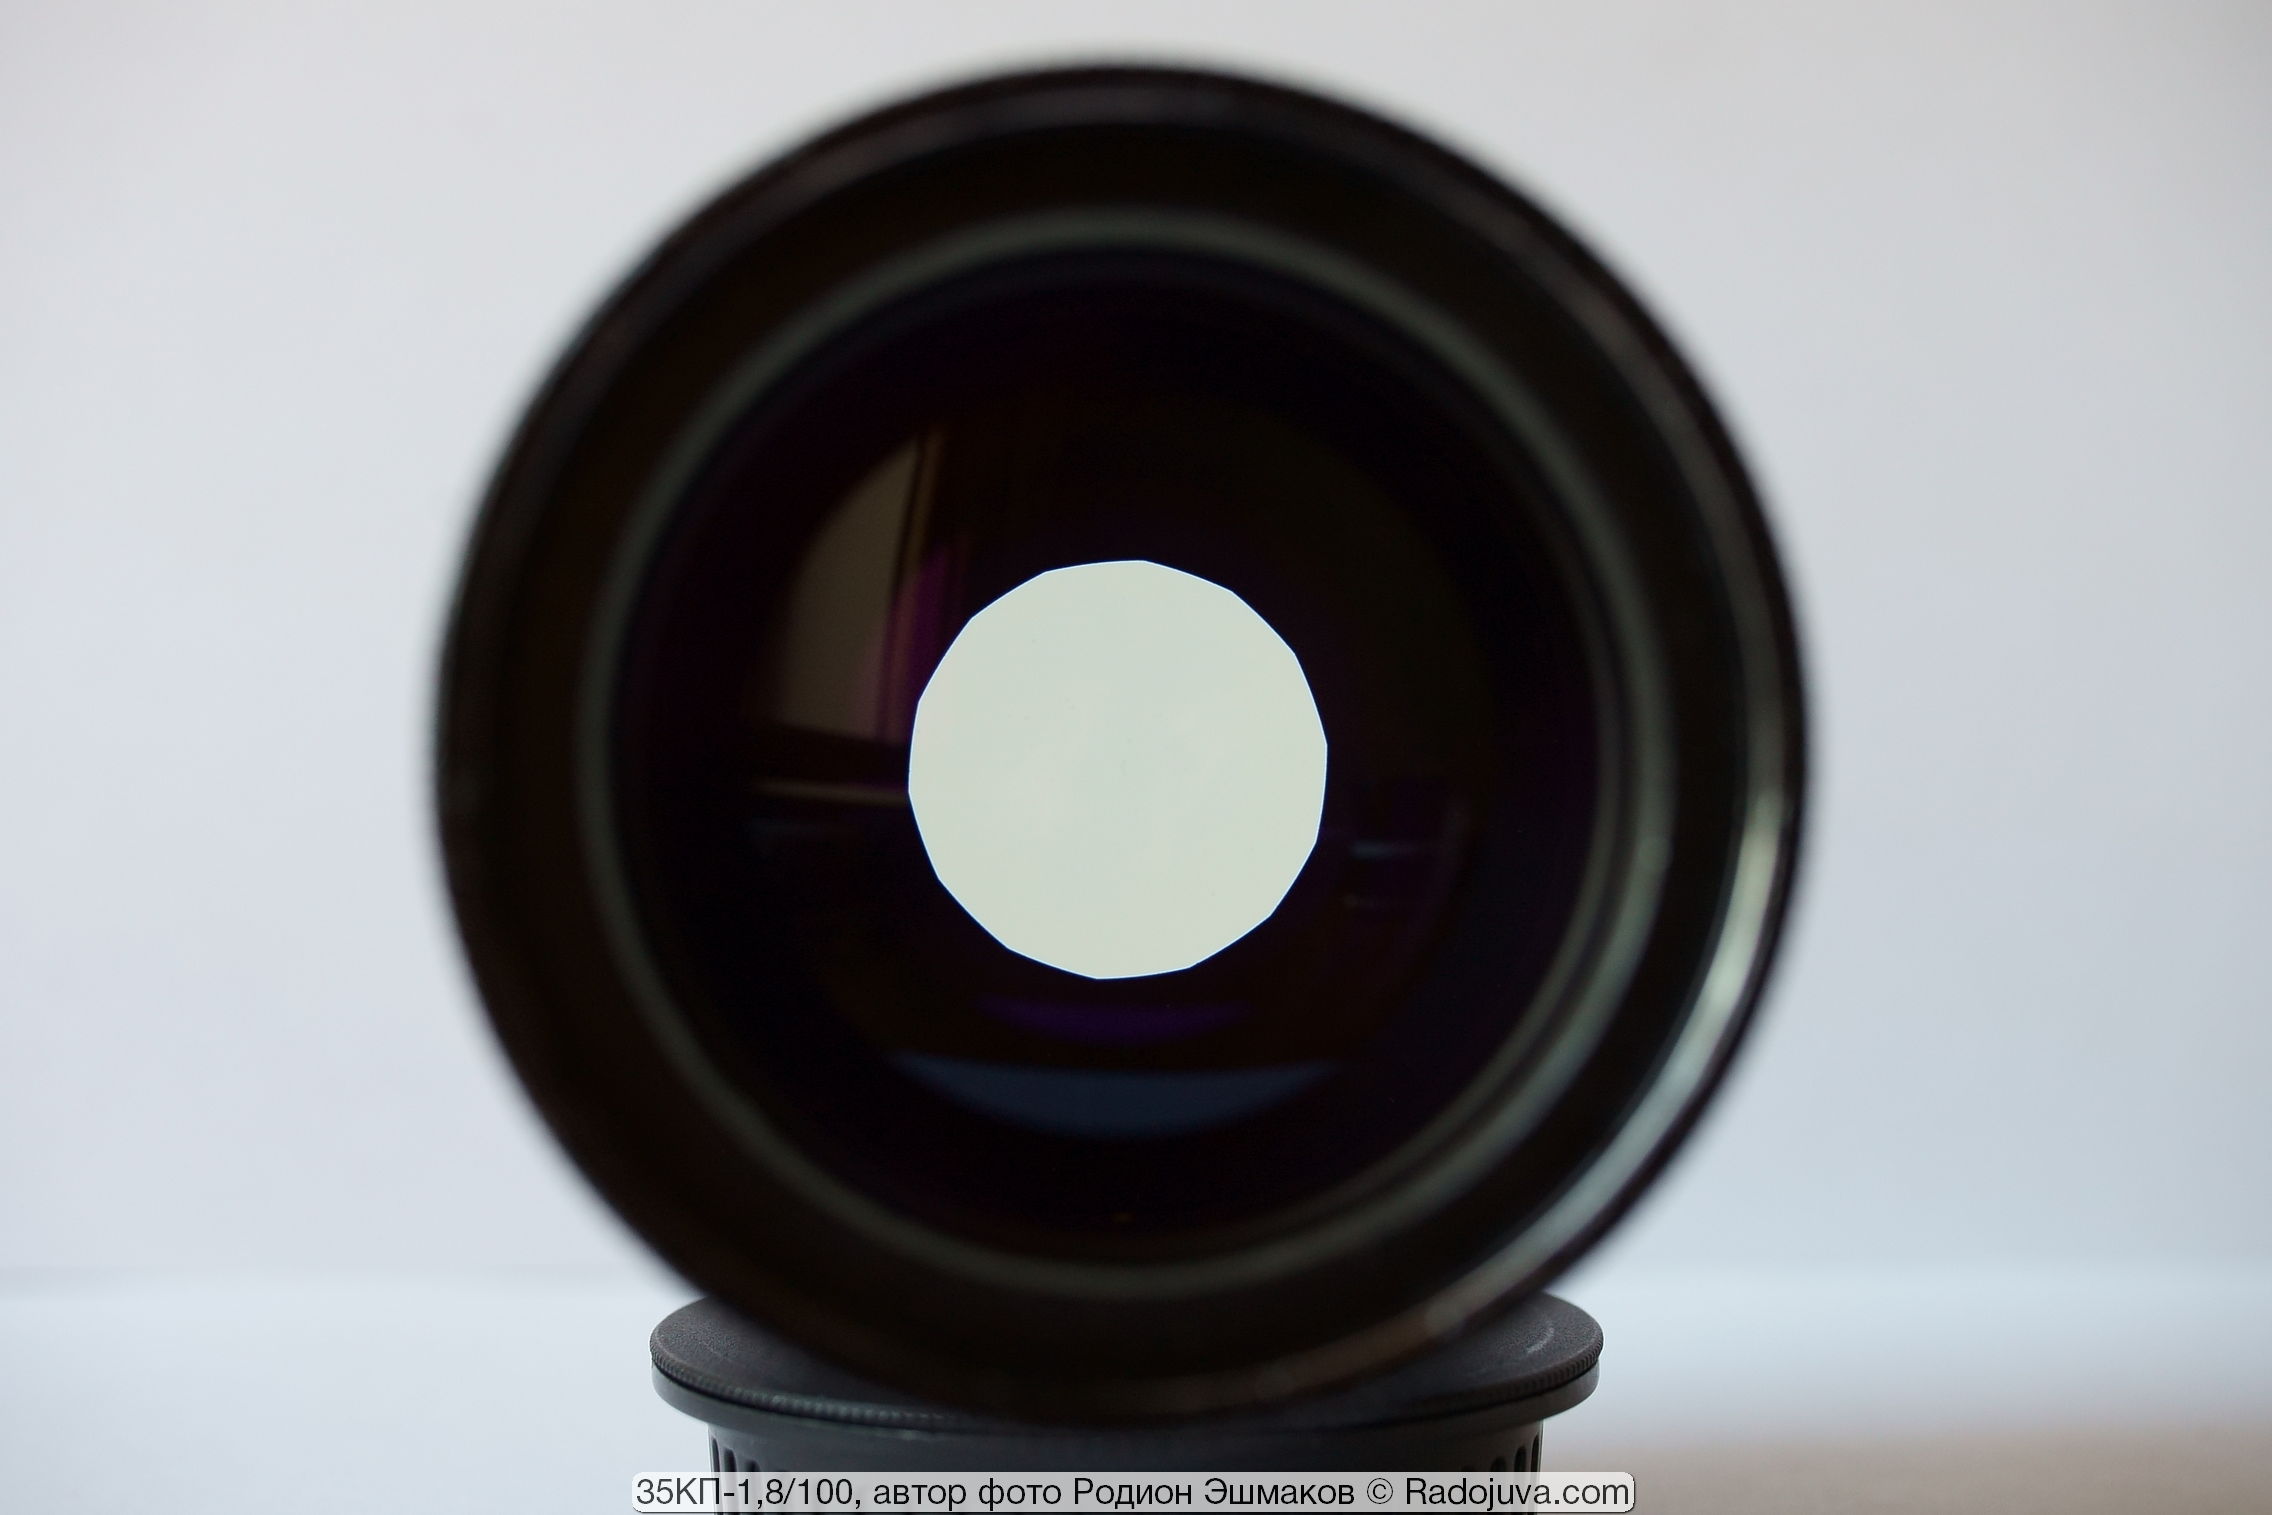 View of a round opening of a covered fourteen-blade diaphragm in the light. Yellow tint of lenses is noticeable.